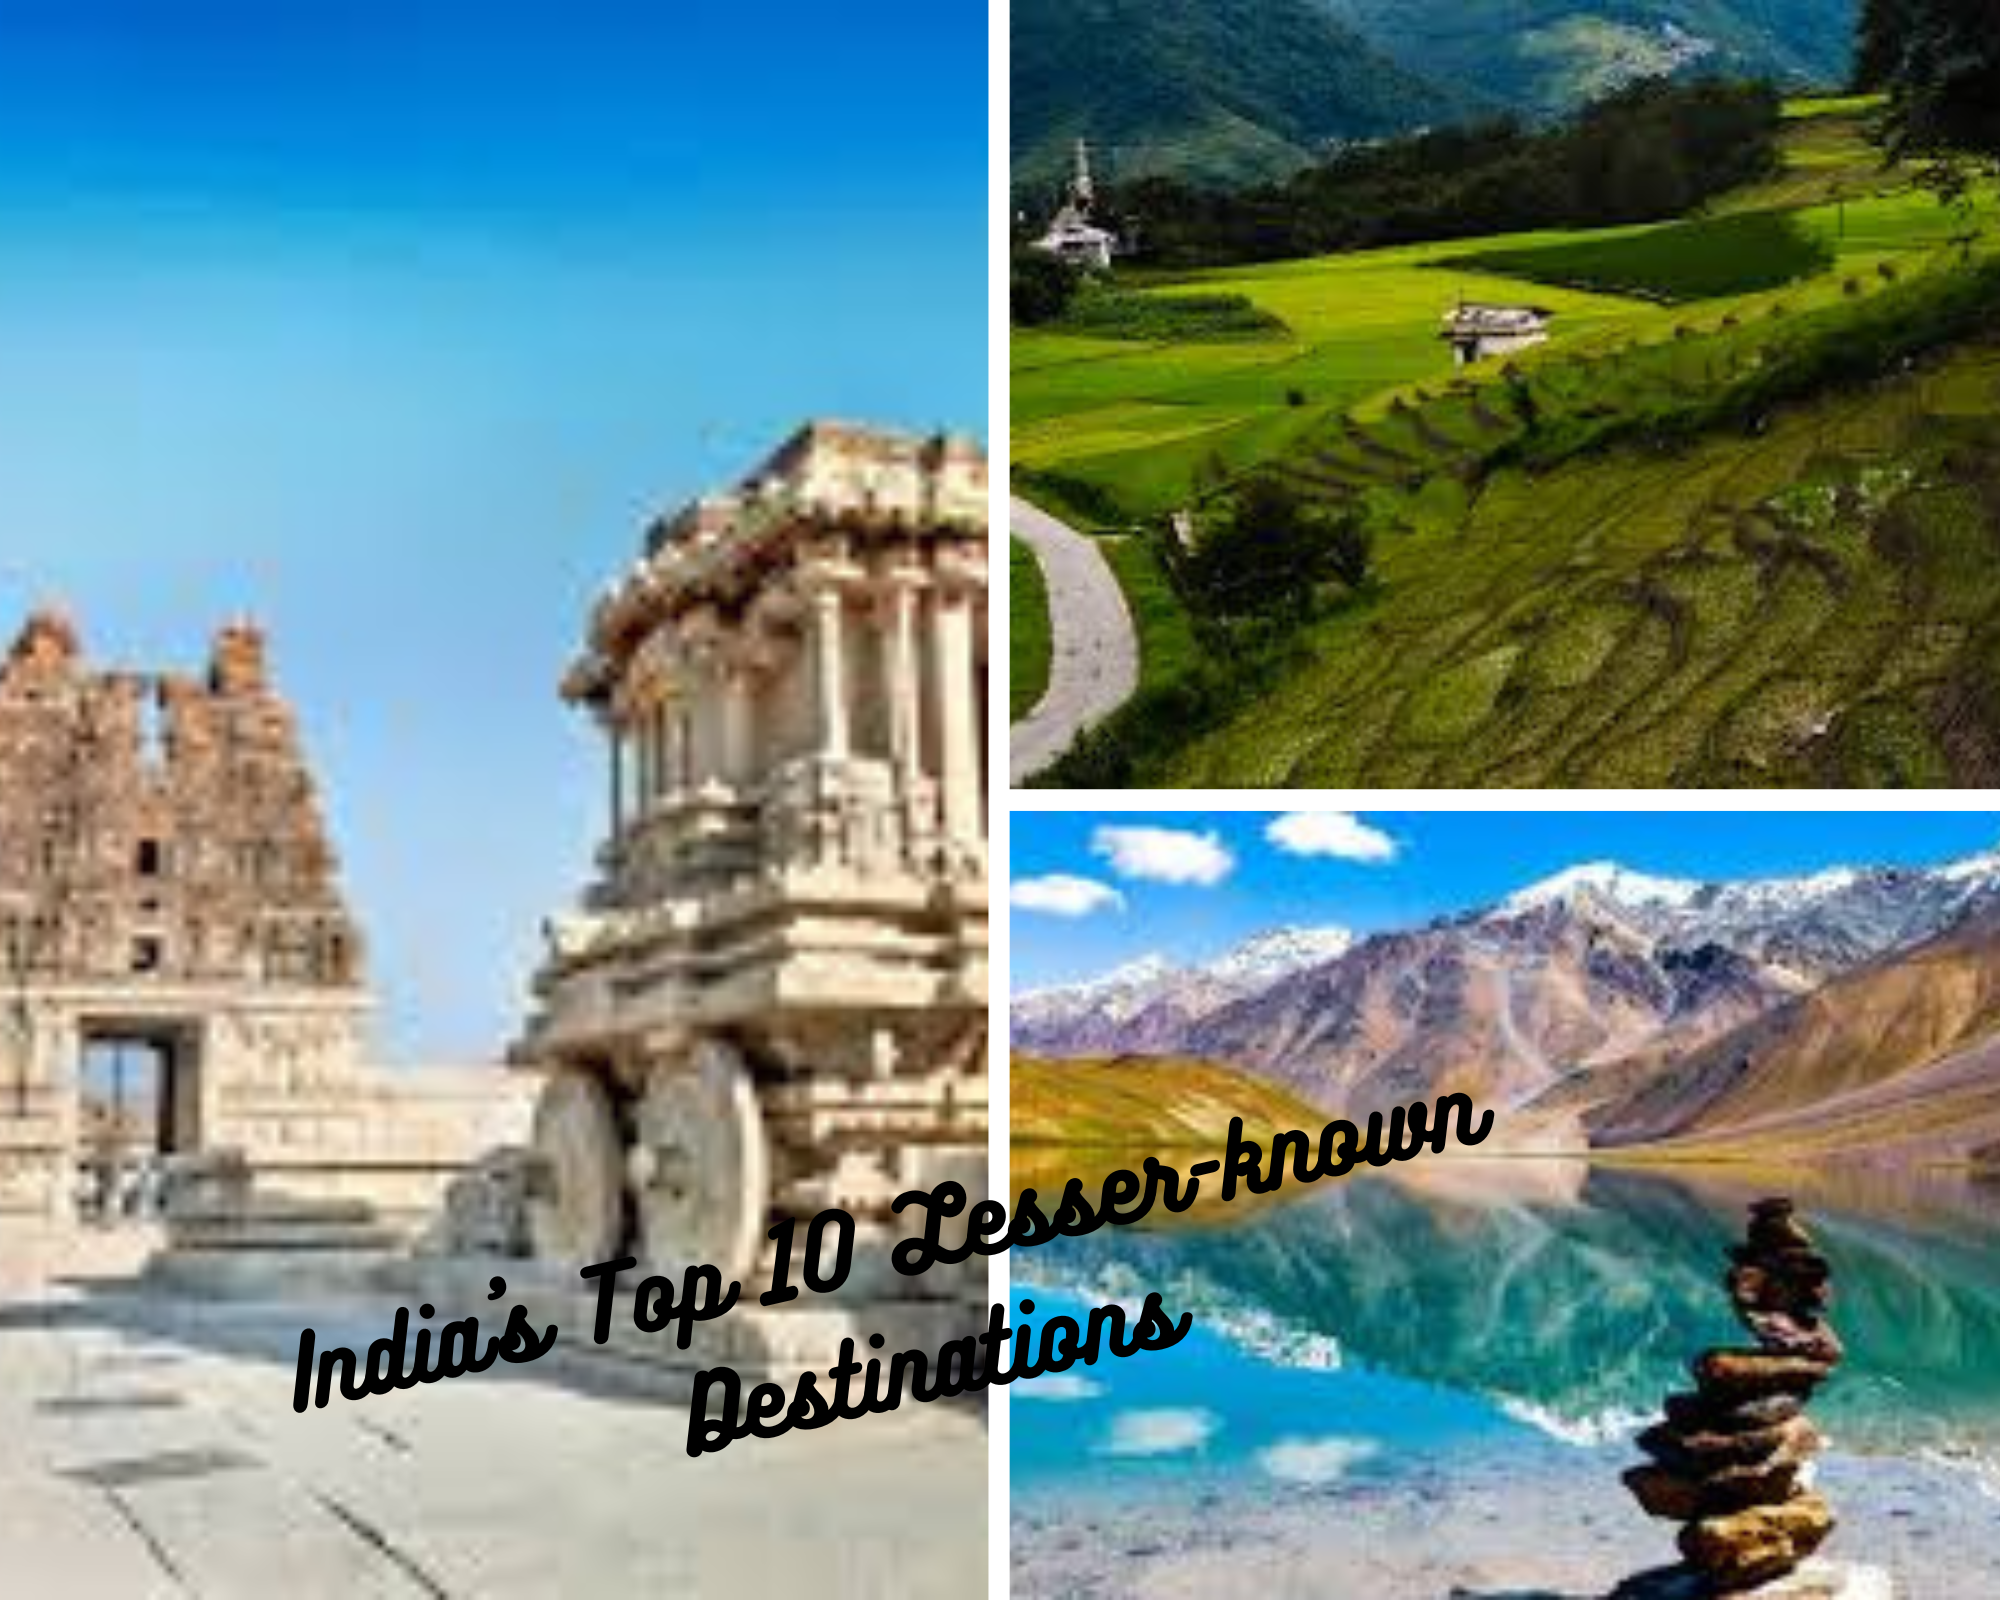 India's Top 10 Lesser-Known Destinations